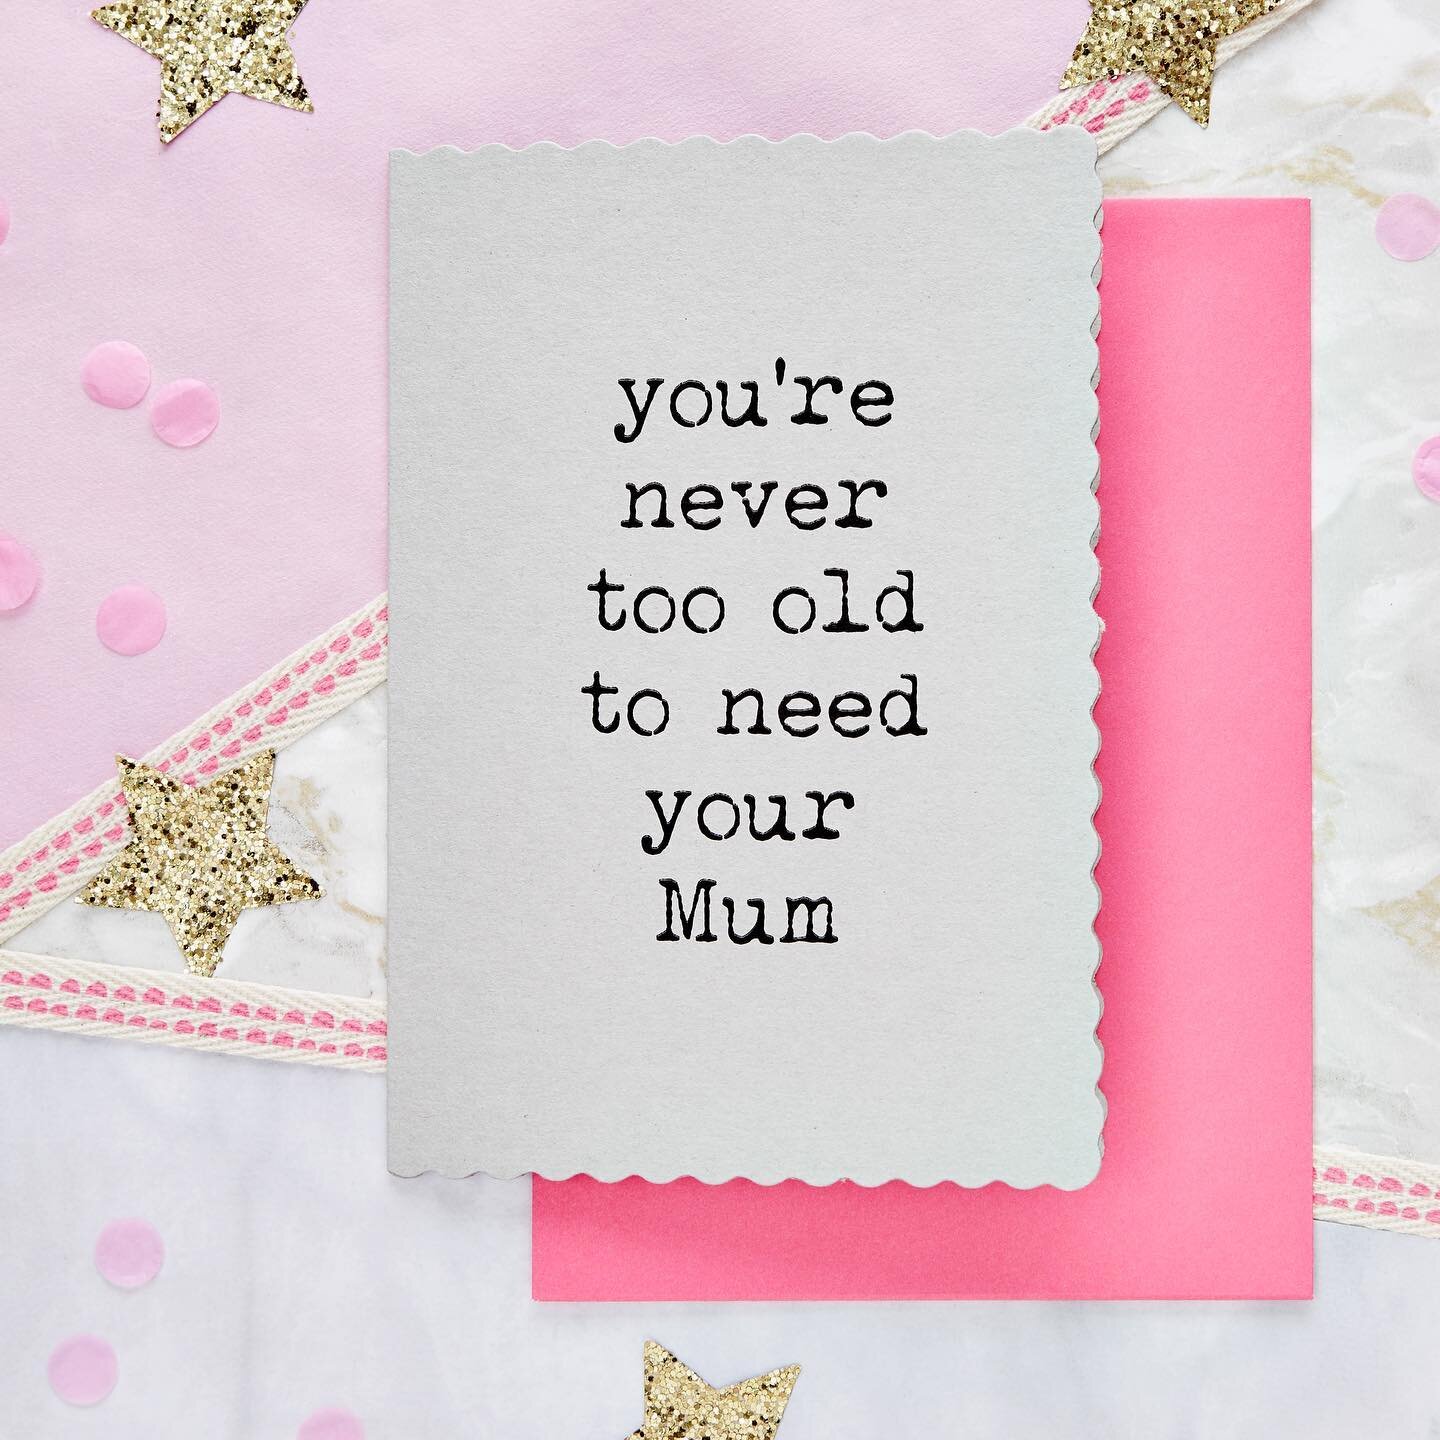 Mother&rsquo;s Day is fast approaching 🌸💕 (14th March) ⭐️ Lots of printing and packing to do 💌📮Don&rsquo;t forget to grab yours now (only a few of these left now!)
#mothersday #mothersdaycard #mothersdaygifts #specialmum #noths #etsy #etsyuk #lol